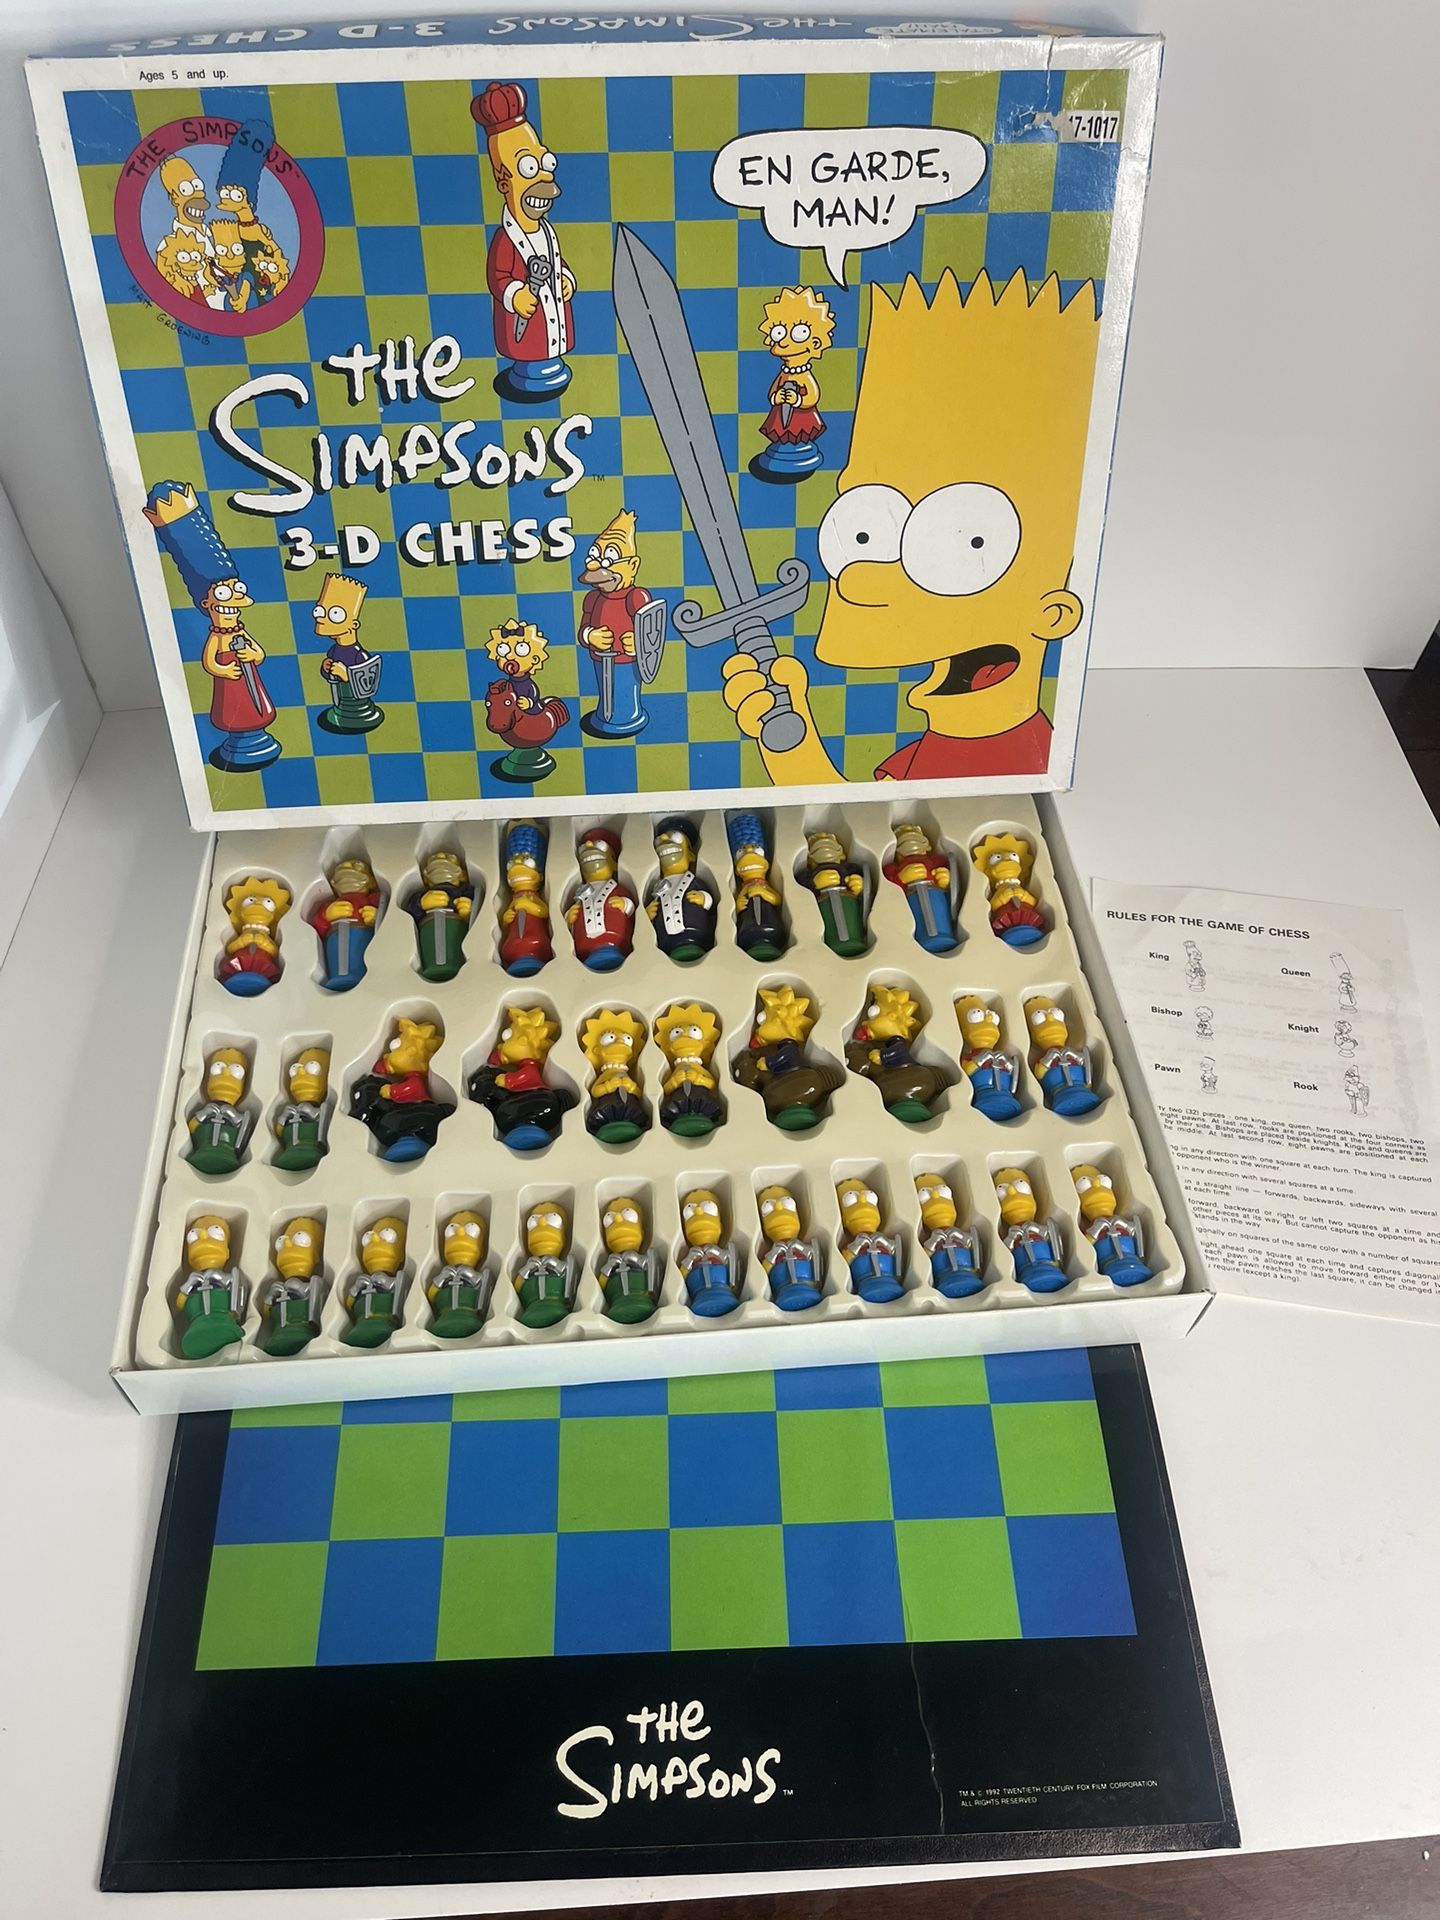 The Simpsons 3-D Chess Set Complete Vintage 1991 Board Game Classic Homer Bart